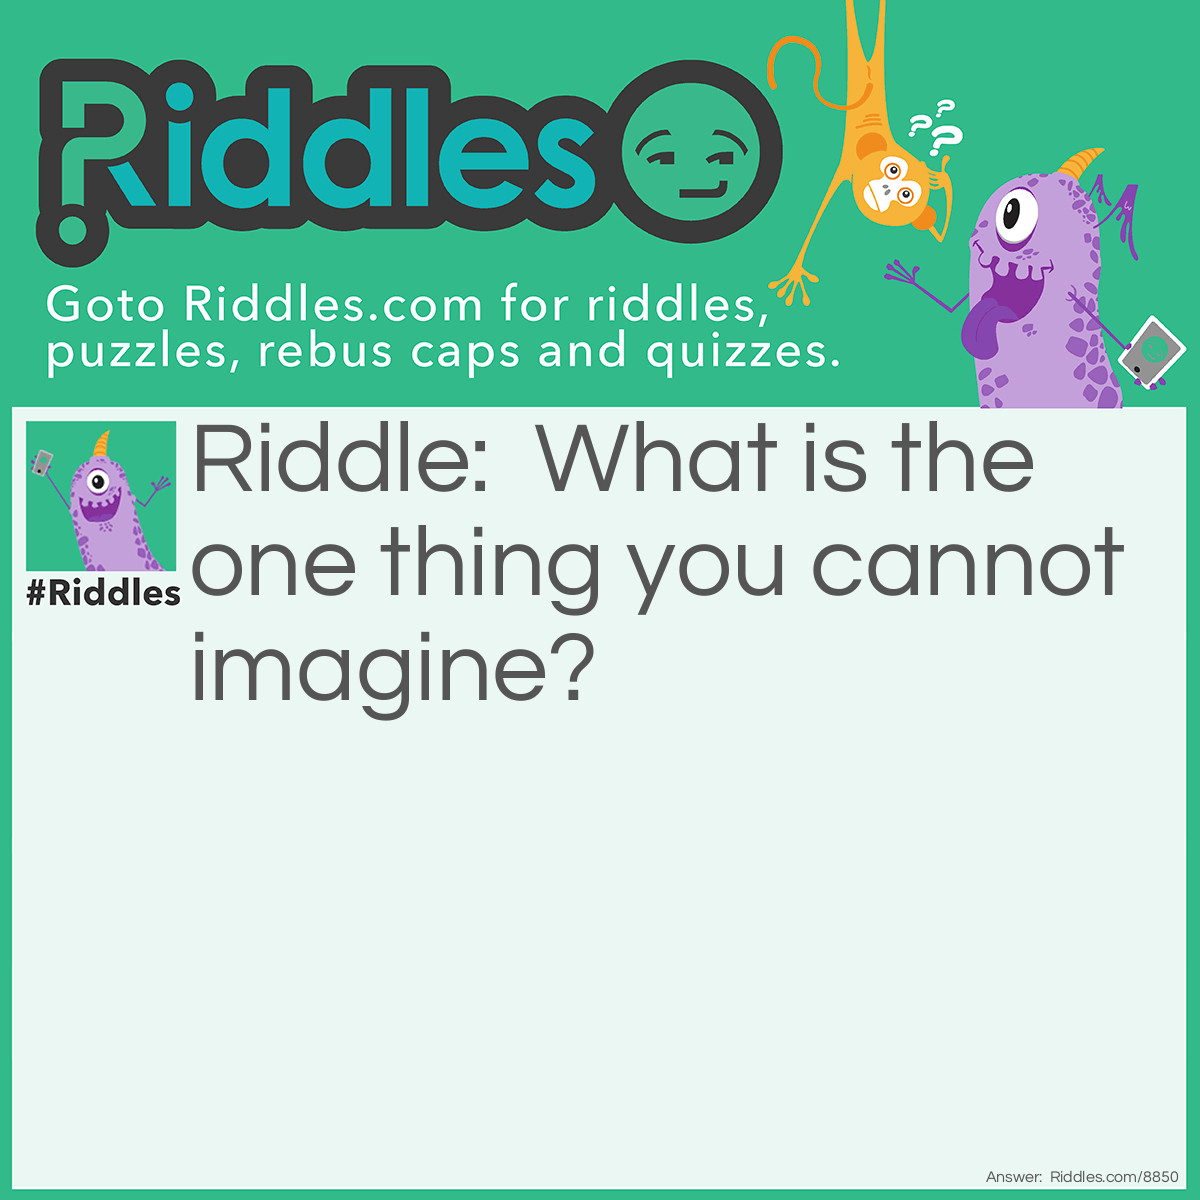 Riddle: What is the one thing you cannot imagine? Answer: A color you have never seen before.